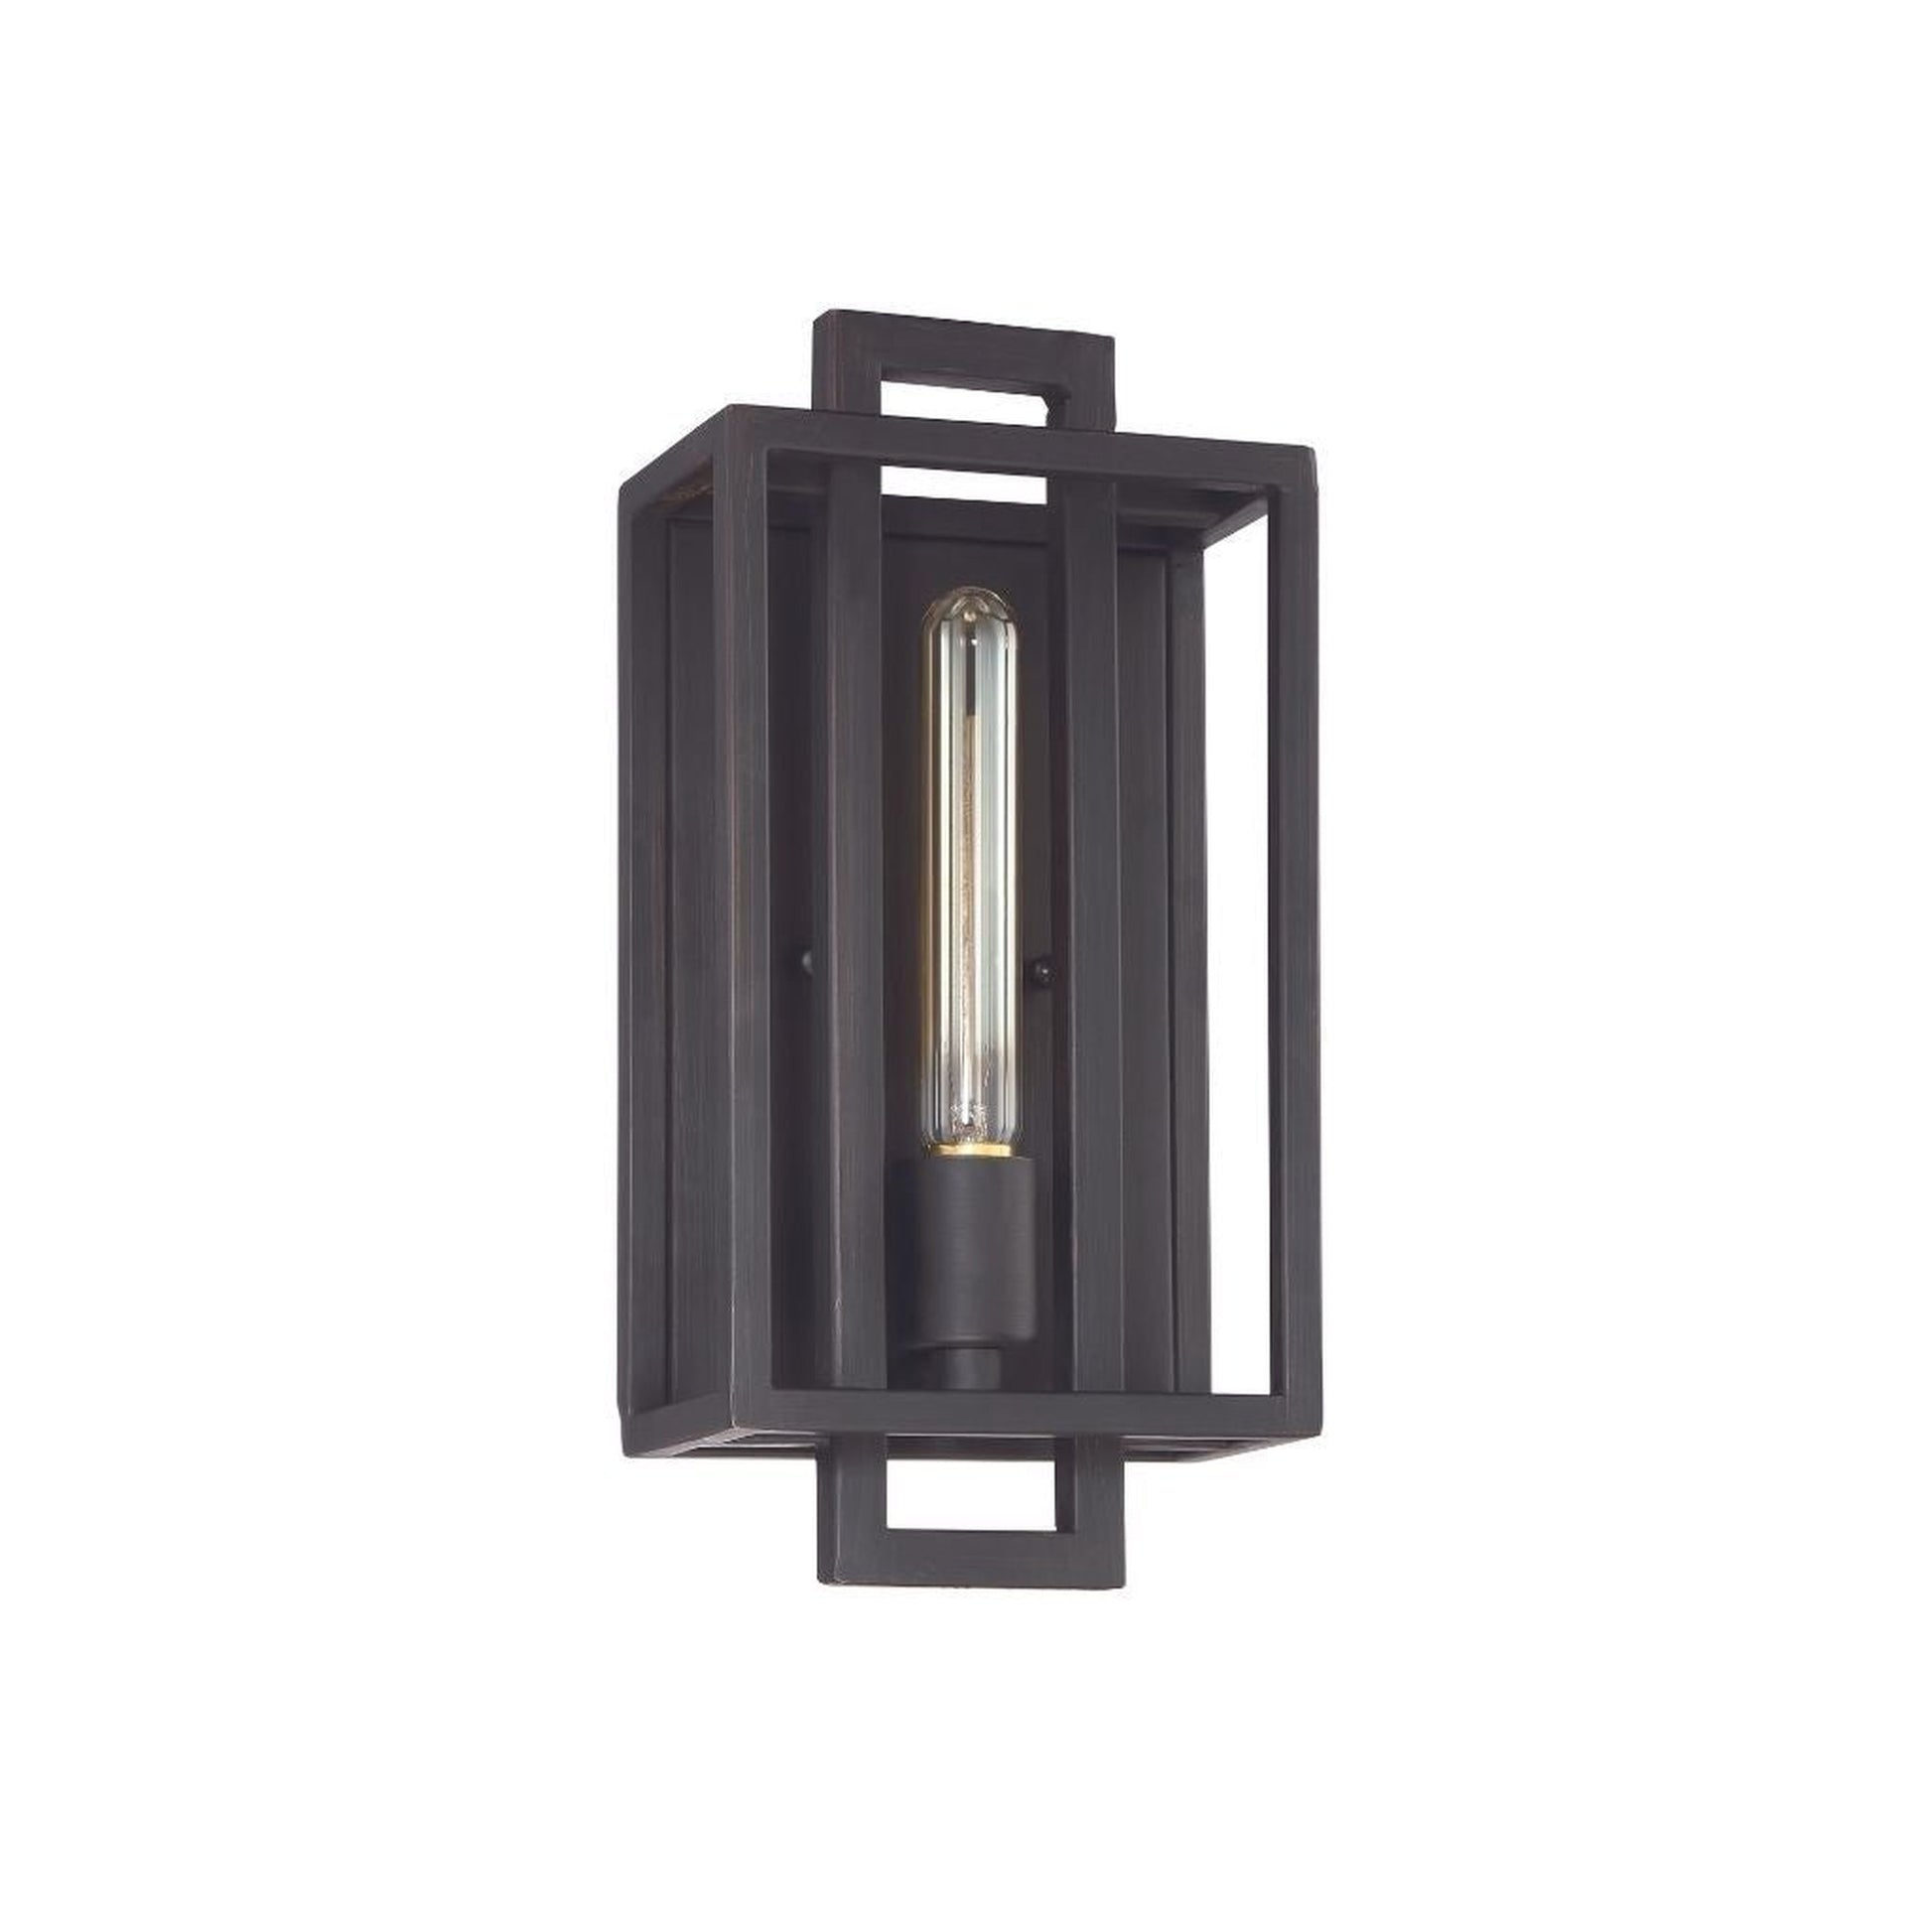 Craftmade Cubic 7" x 14" 1-Light Aged Brushed Bronze Wall Sconce With Open Geometric Frame